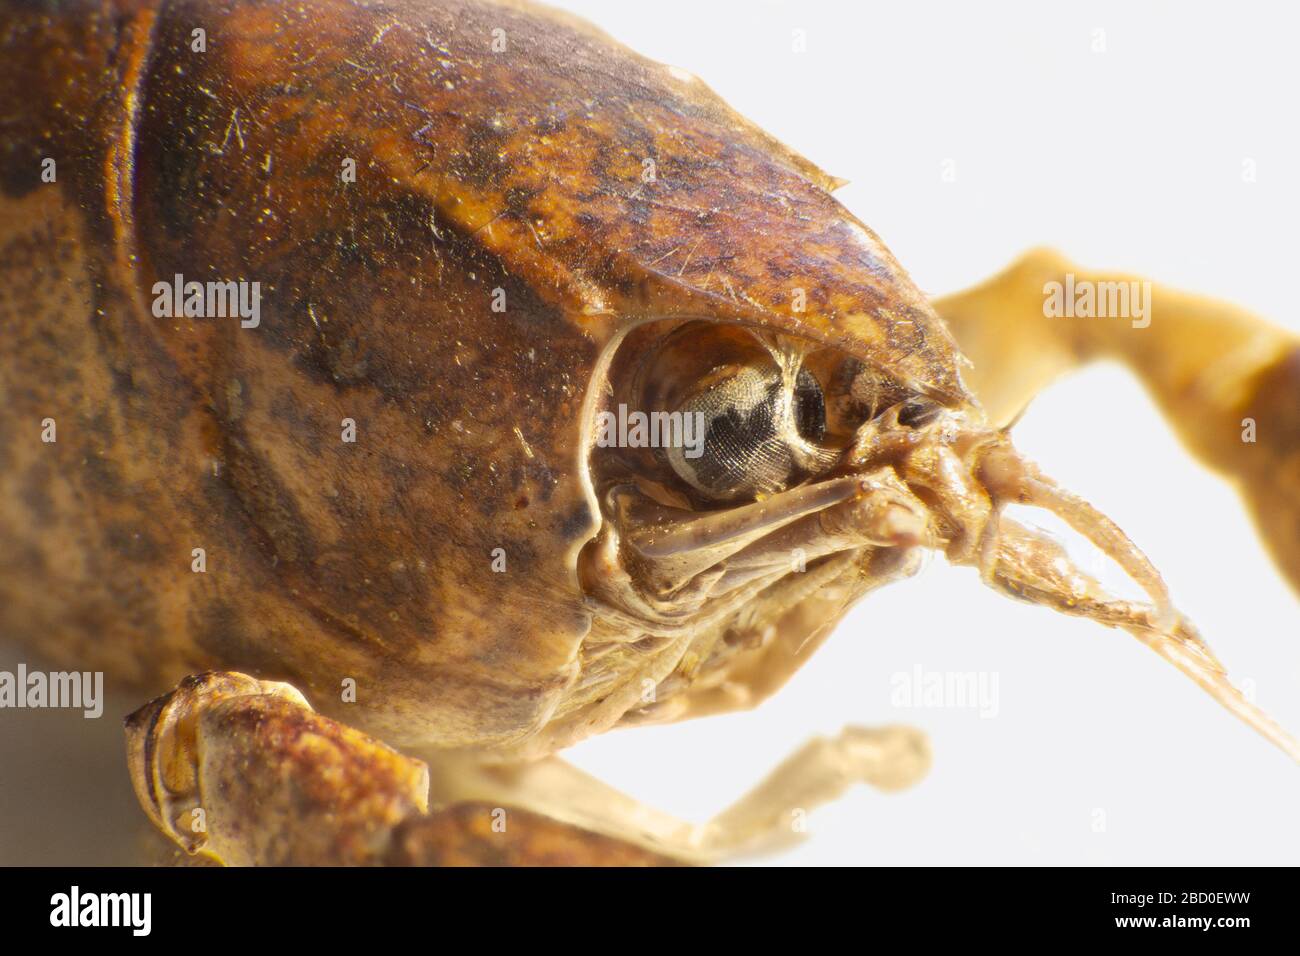 macro shot showing the head of a small crayfish Stock Photo